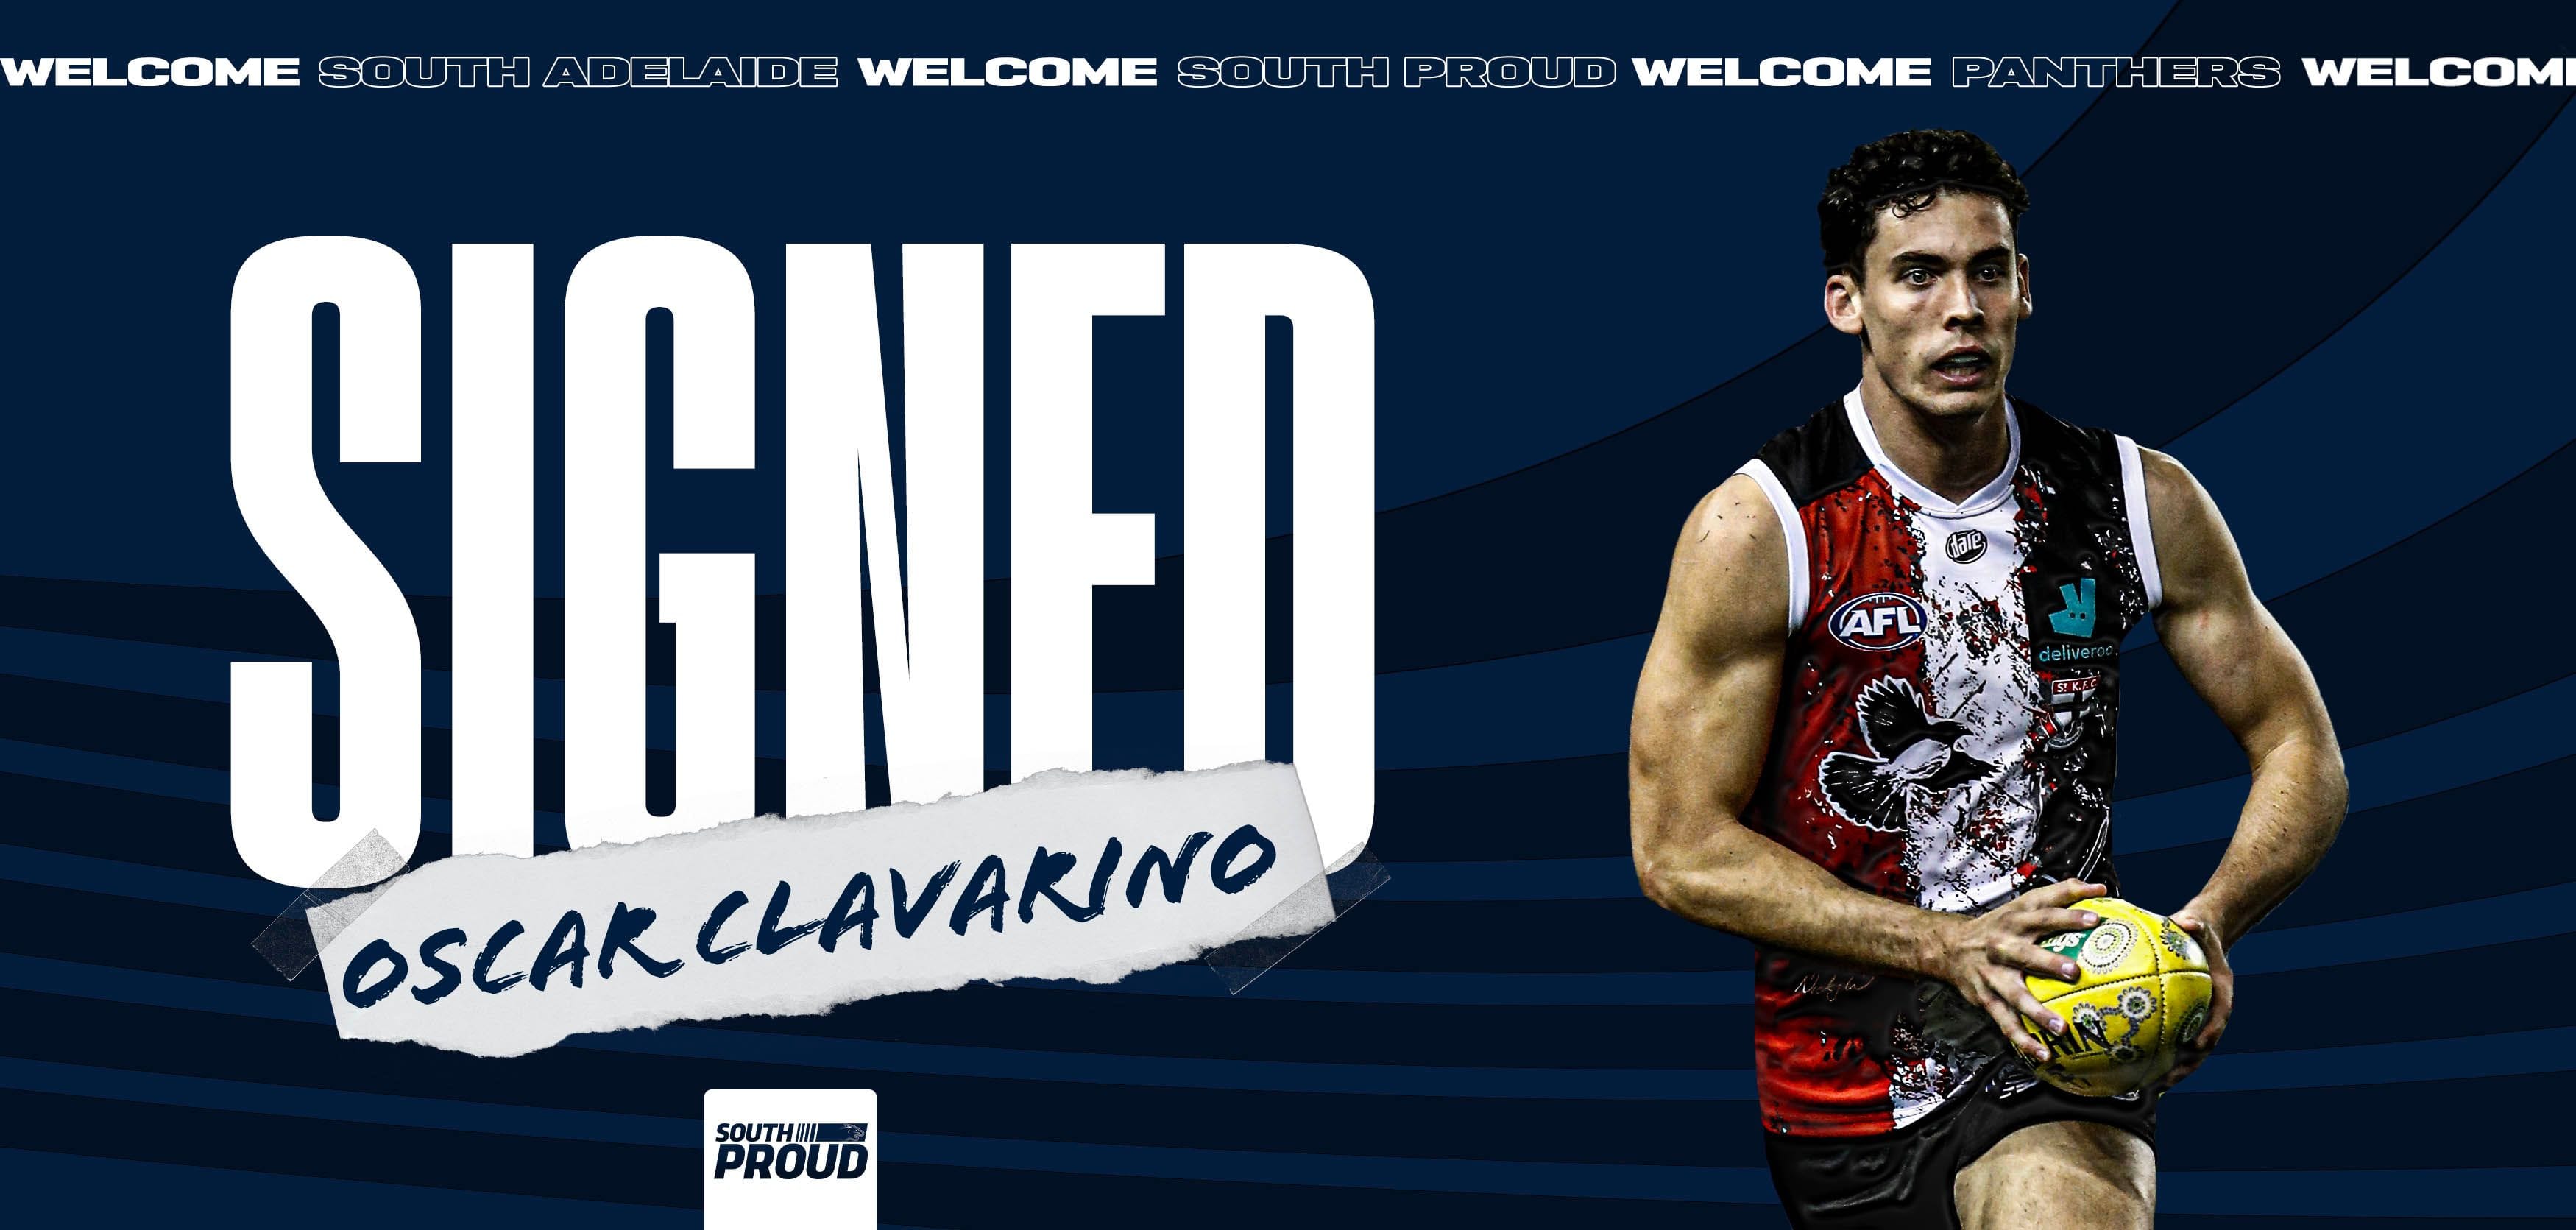 Oscar Clavarino becomes a Panther